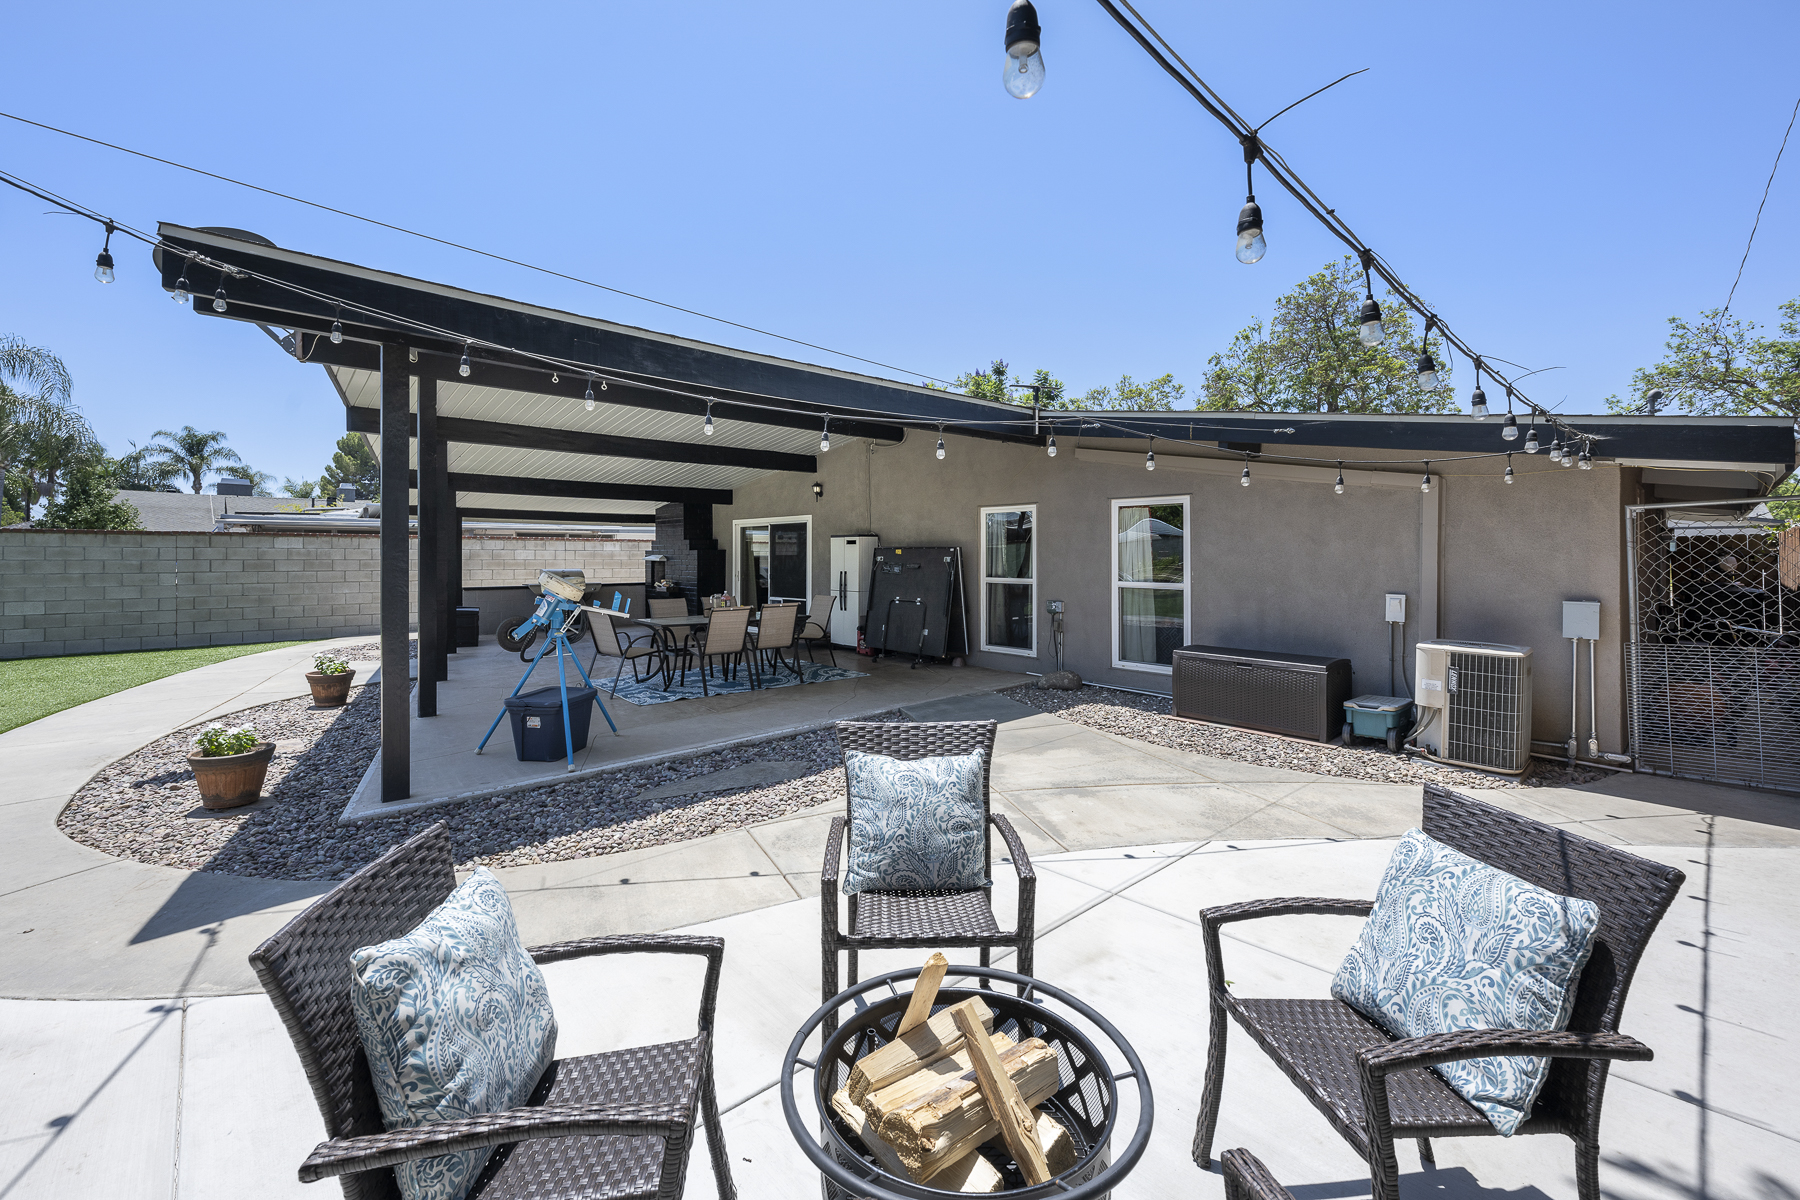 712 N. Mountain View Place, Fullerton, CA 92831